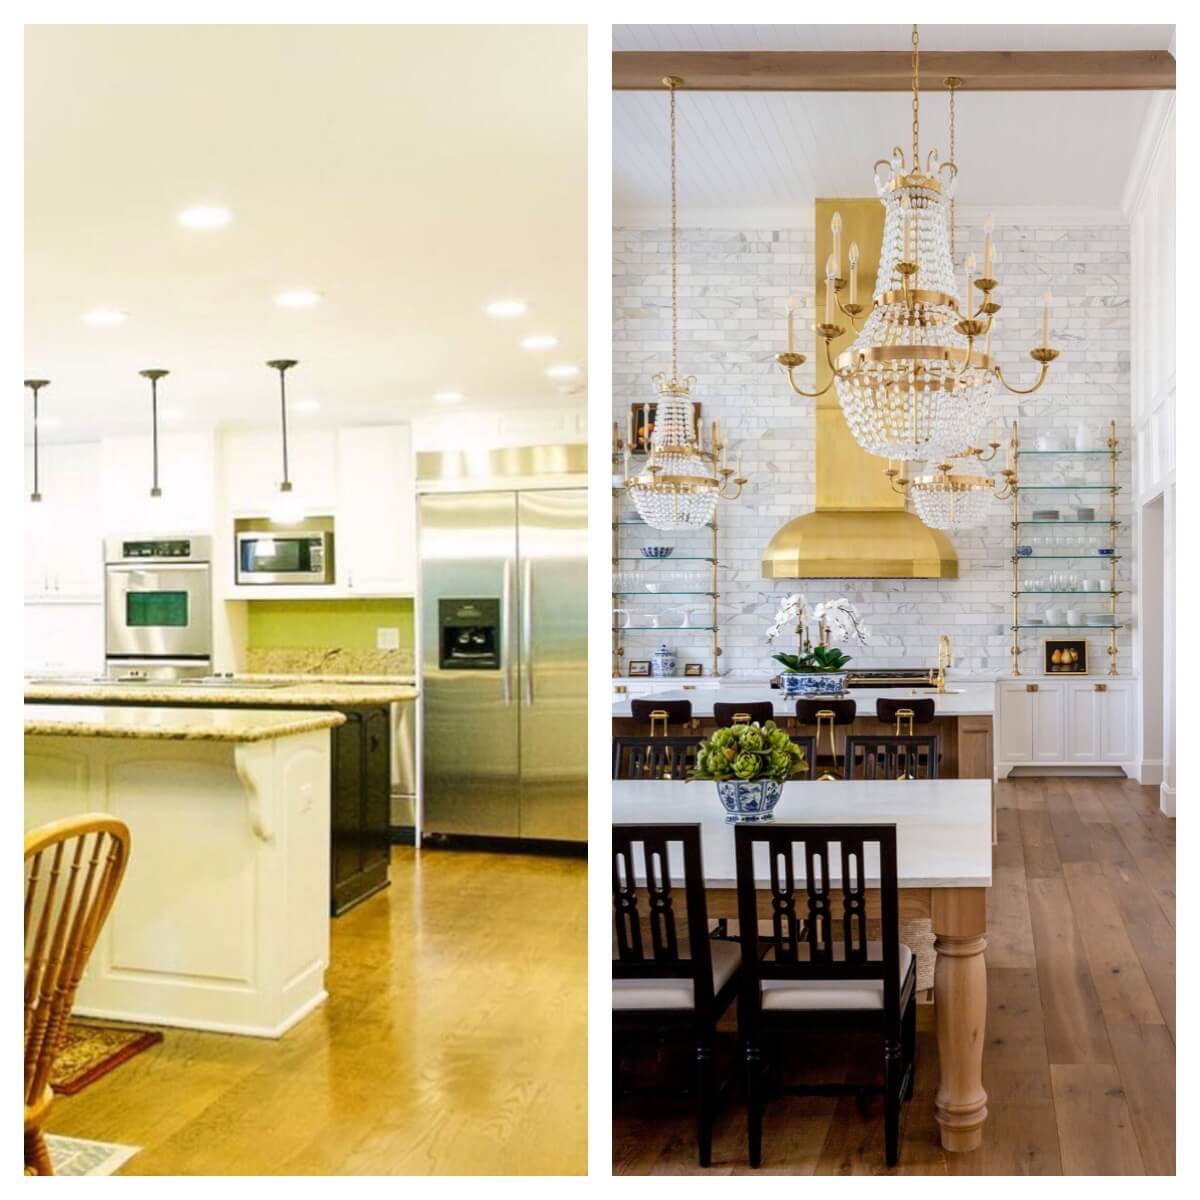 Before and after home transformation with side by side comparison